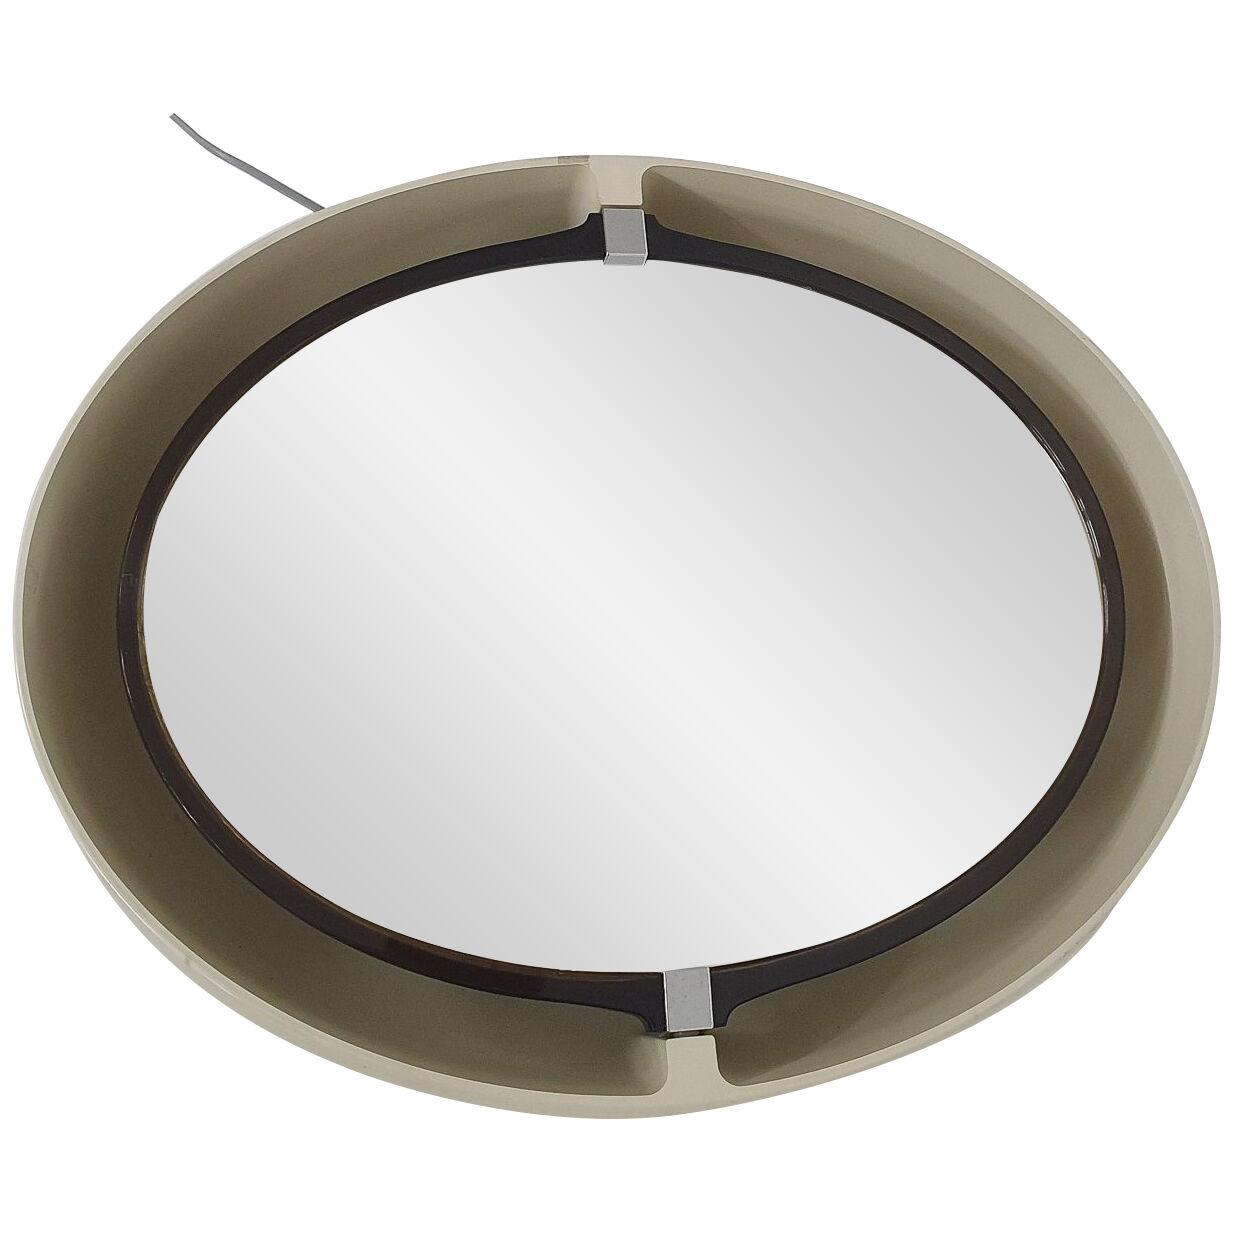 White oval space age mirror by Allibert, Germany 1970's